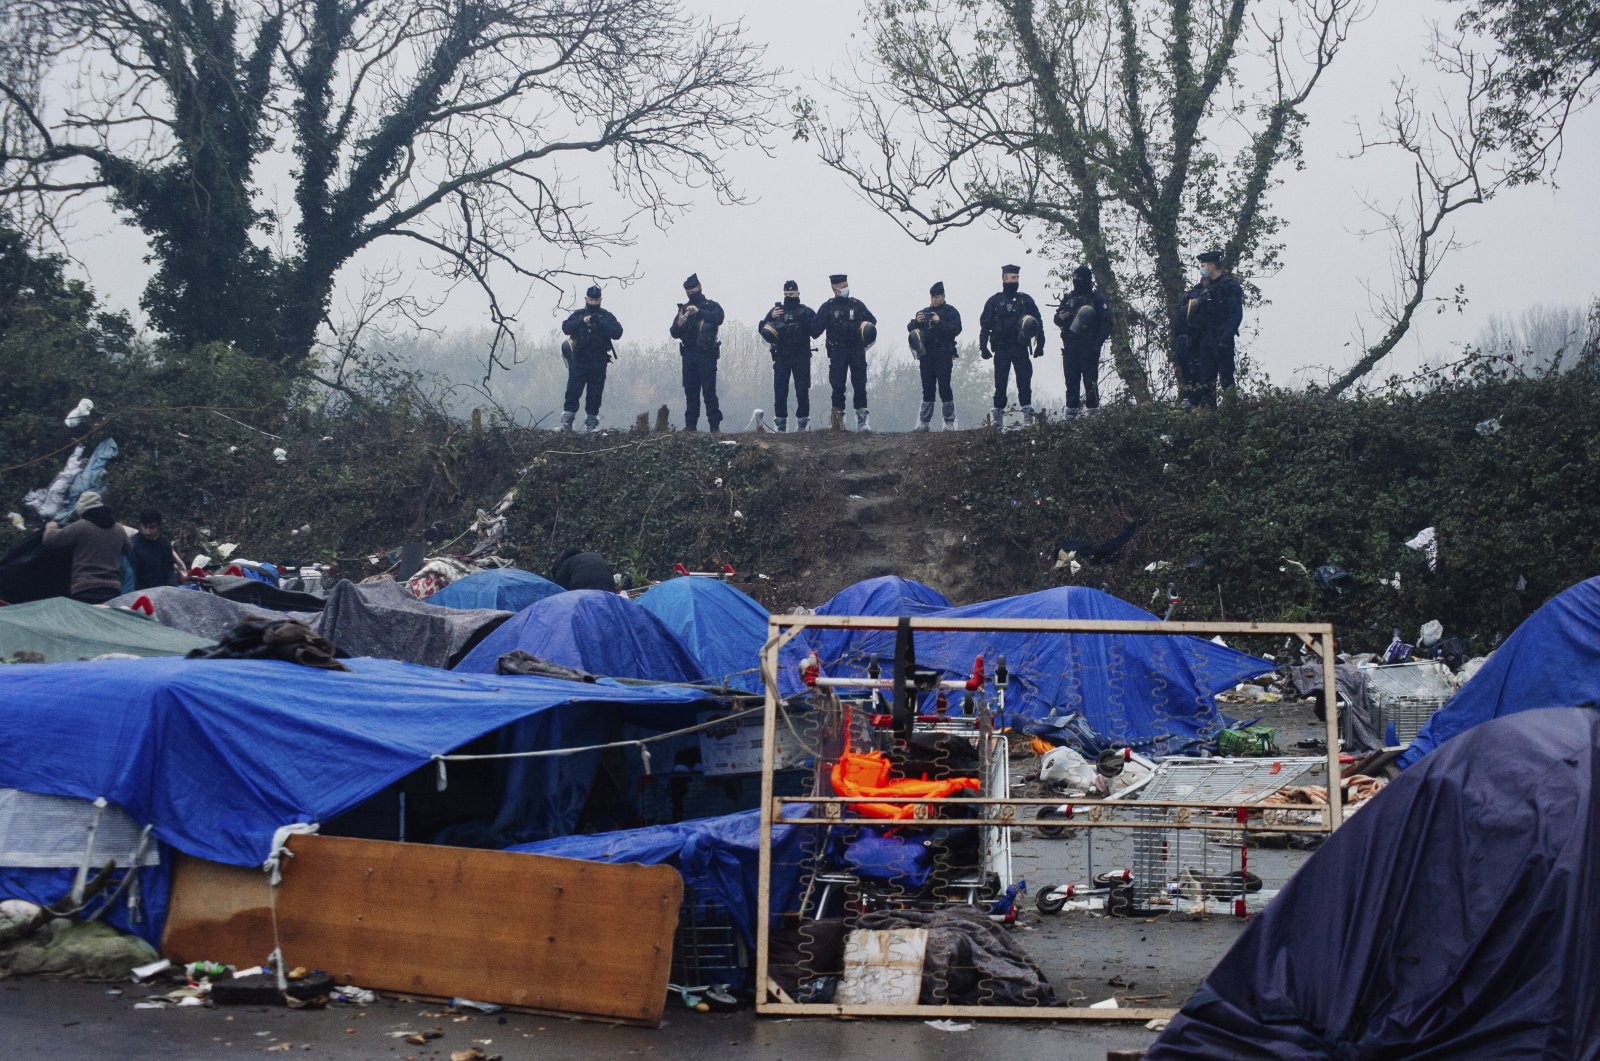 Police forces watch a makeshift migrant camp in Grande-Synthe, Northern France, Nov. 16, 2021. (AP File Photo)